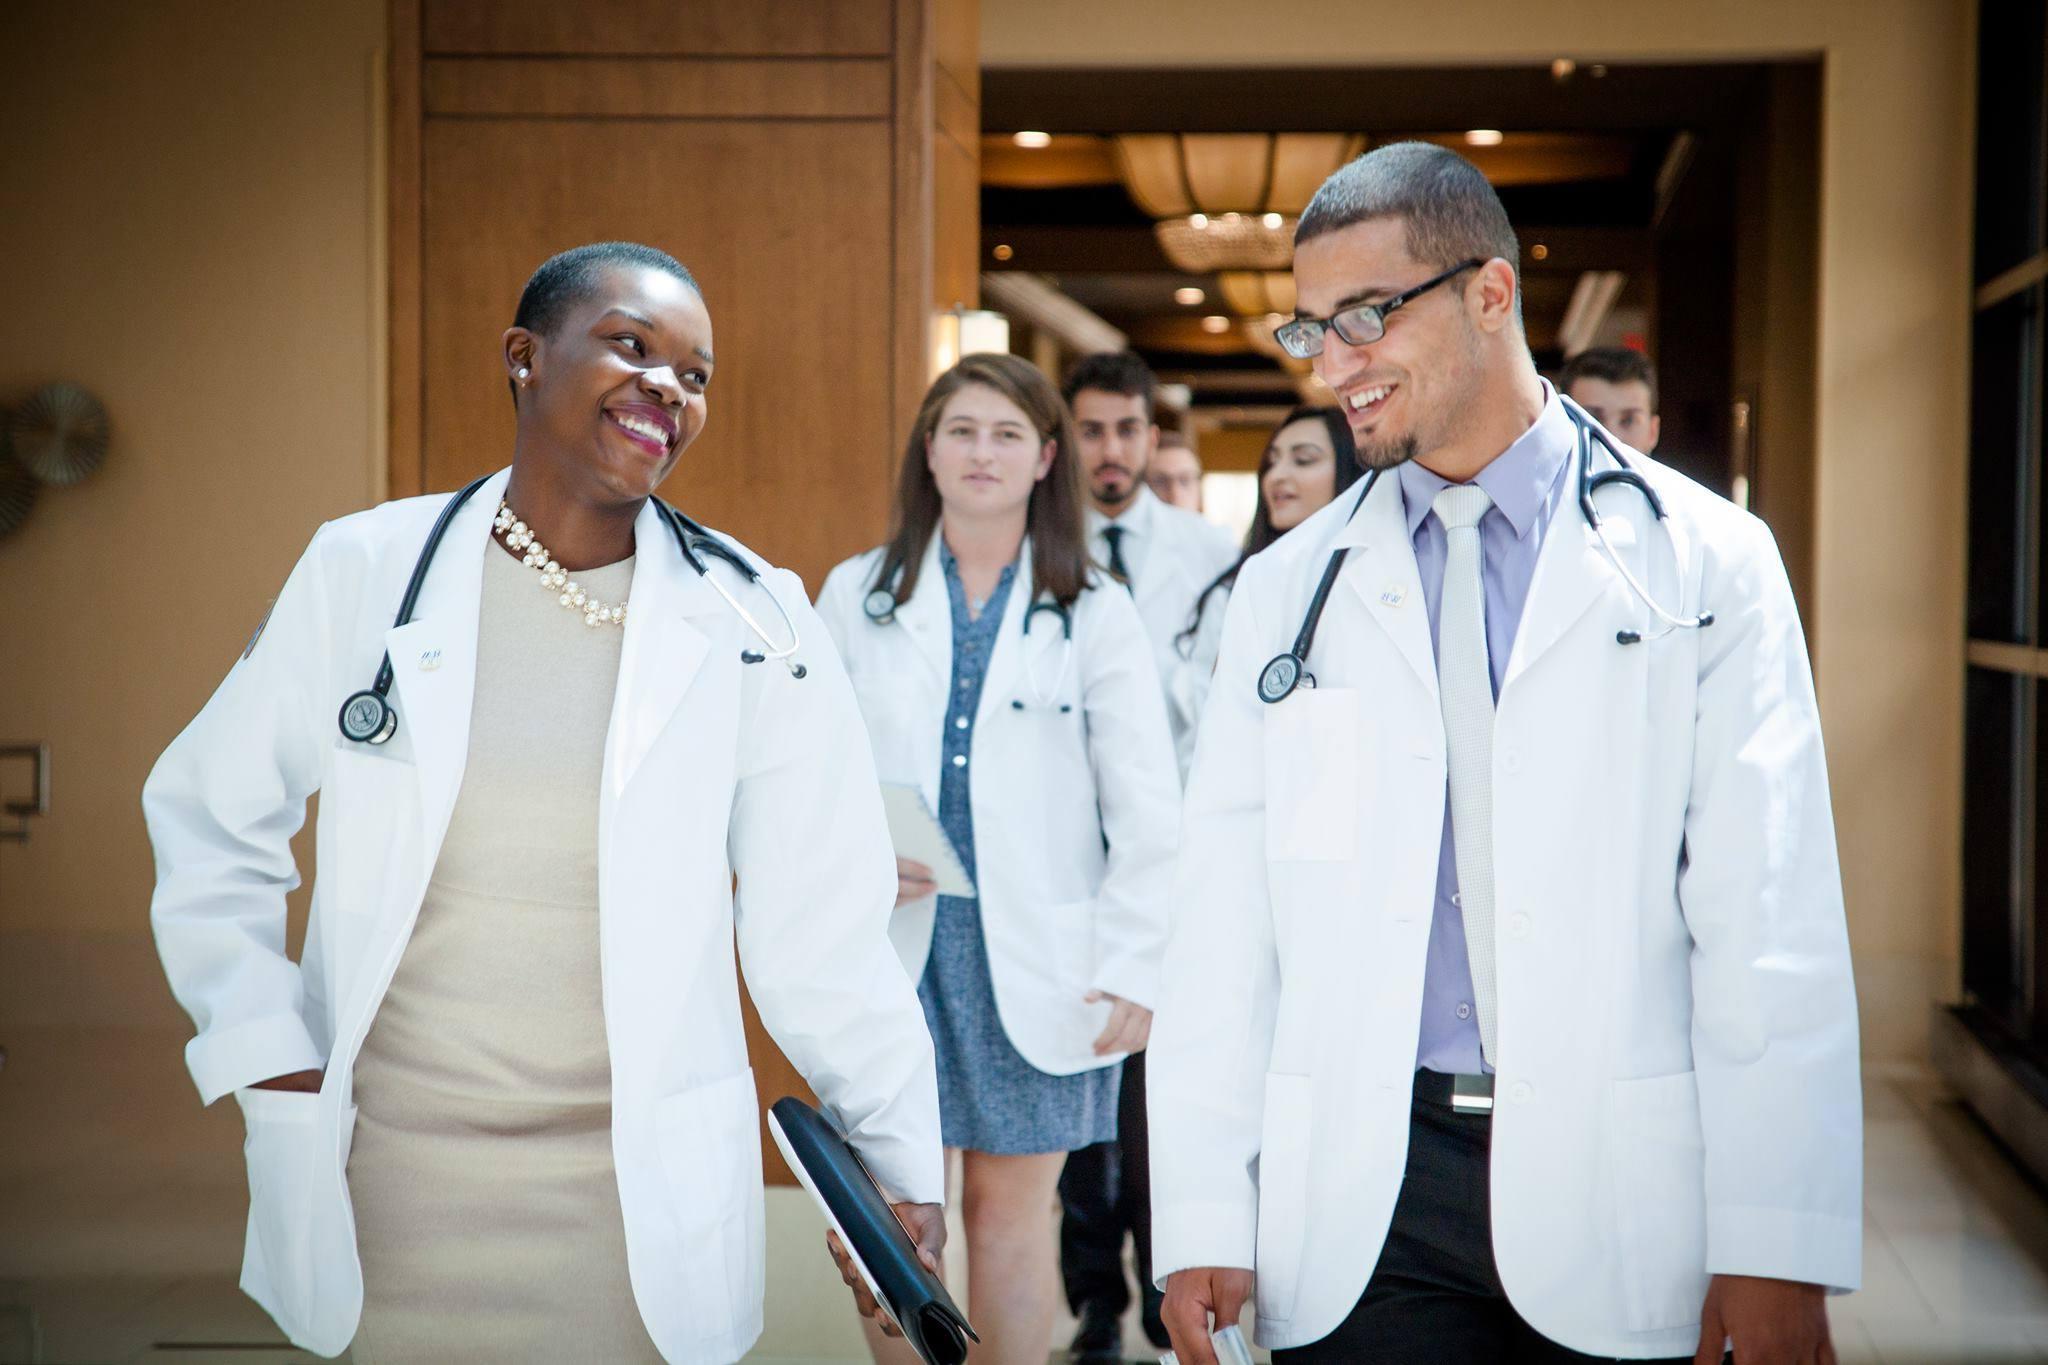 Two students walk out of the White Coat ceremony wearing their coats.